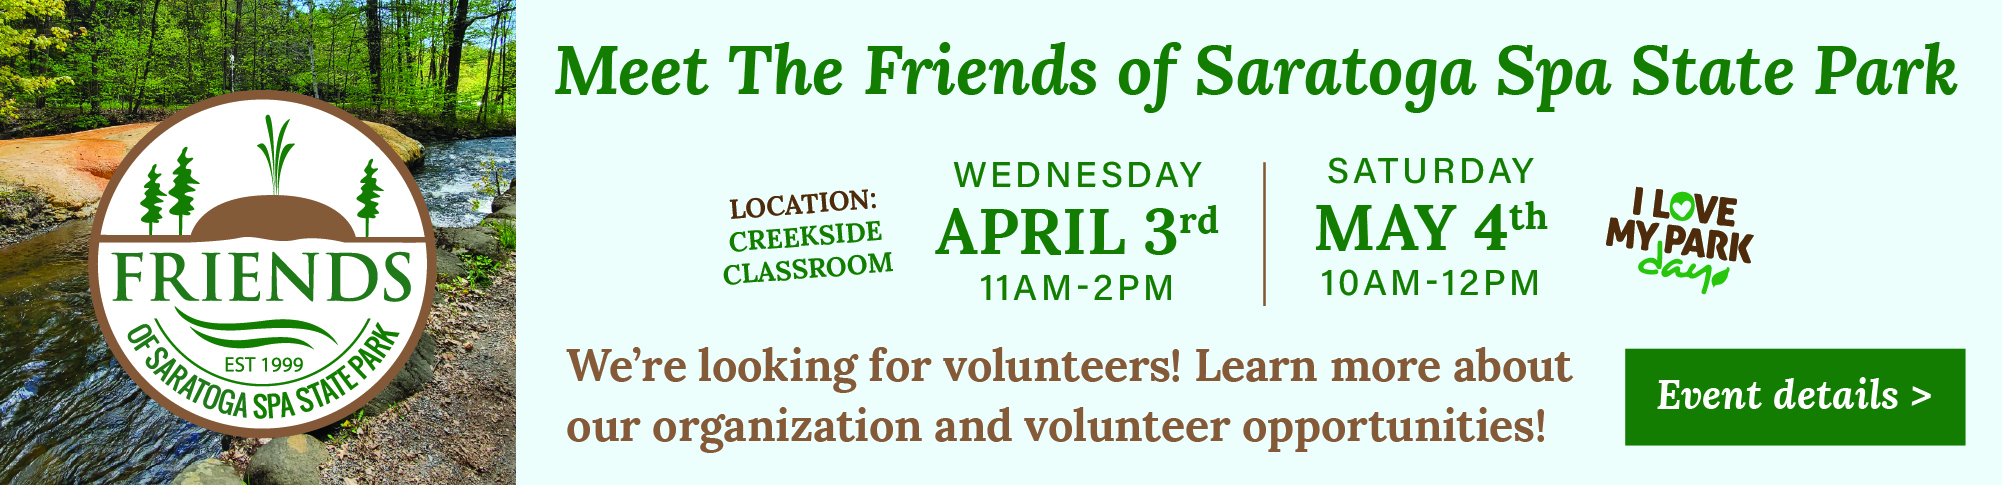 Event Banner-Meet The Friends of Saratoga Spa State Park